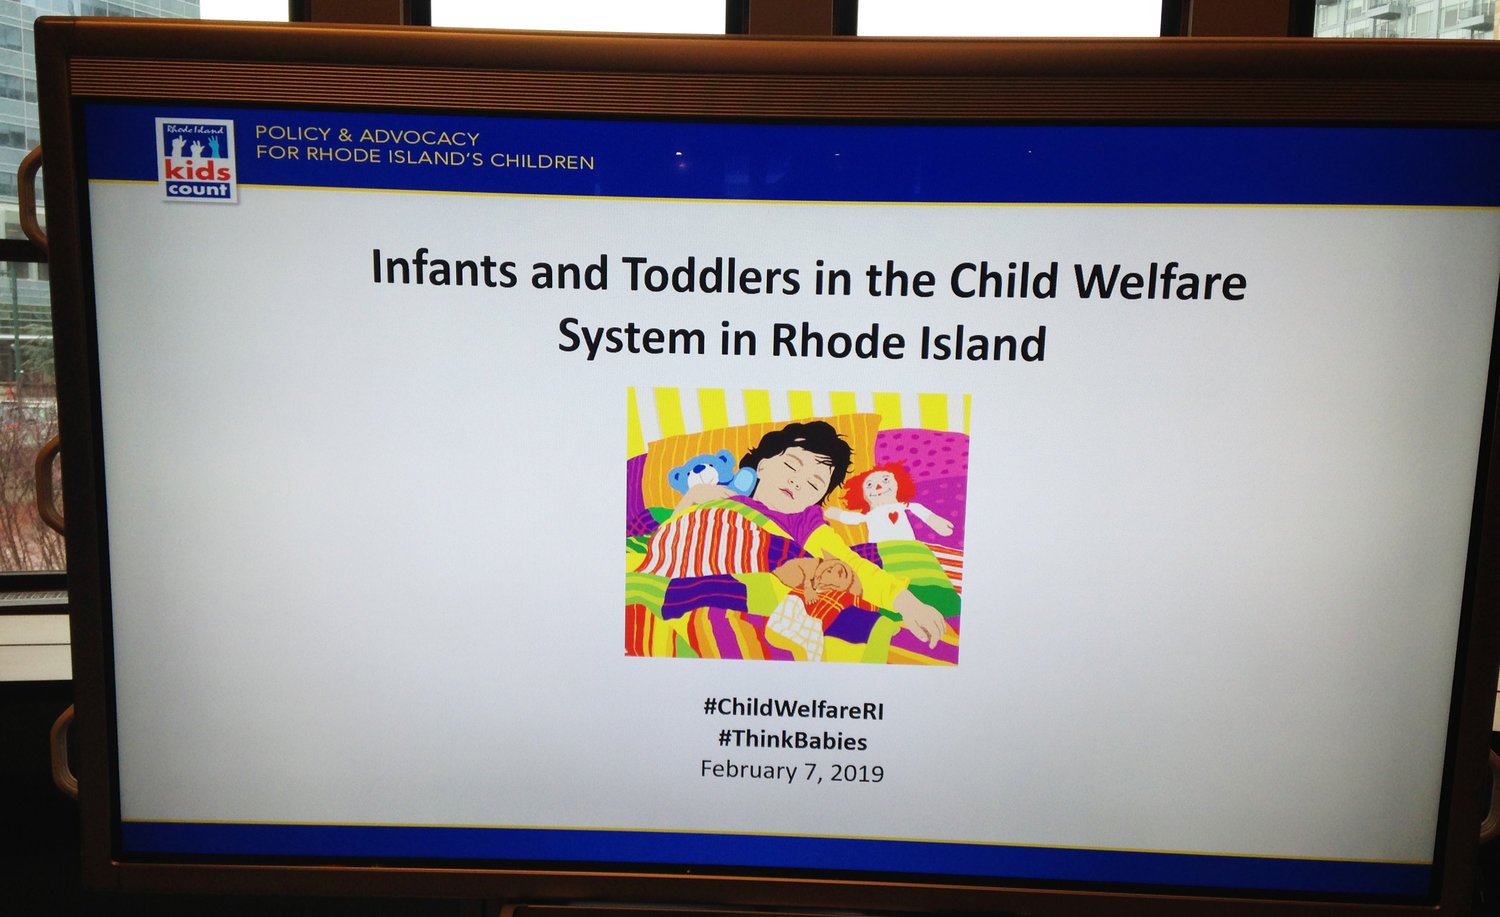 The opening slide on the big display screen at the Feb. 7, 2019, discussion on the new Issue Brief prepared by Rhode Island Kids Count.